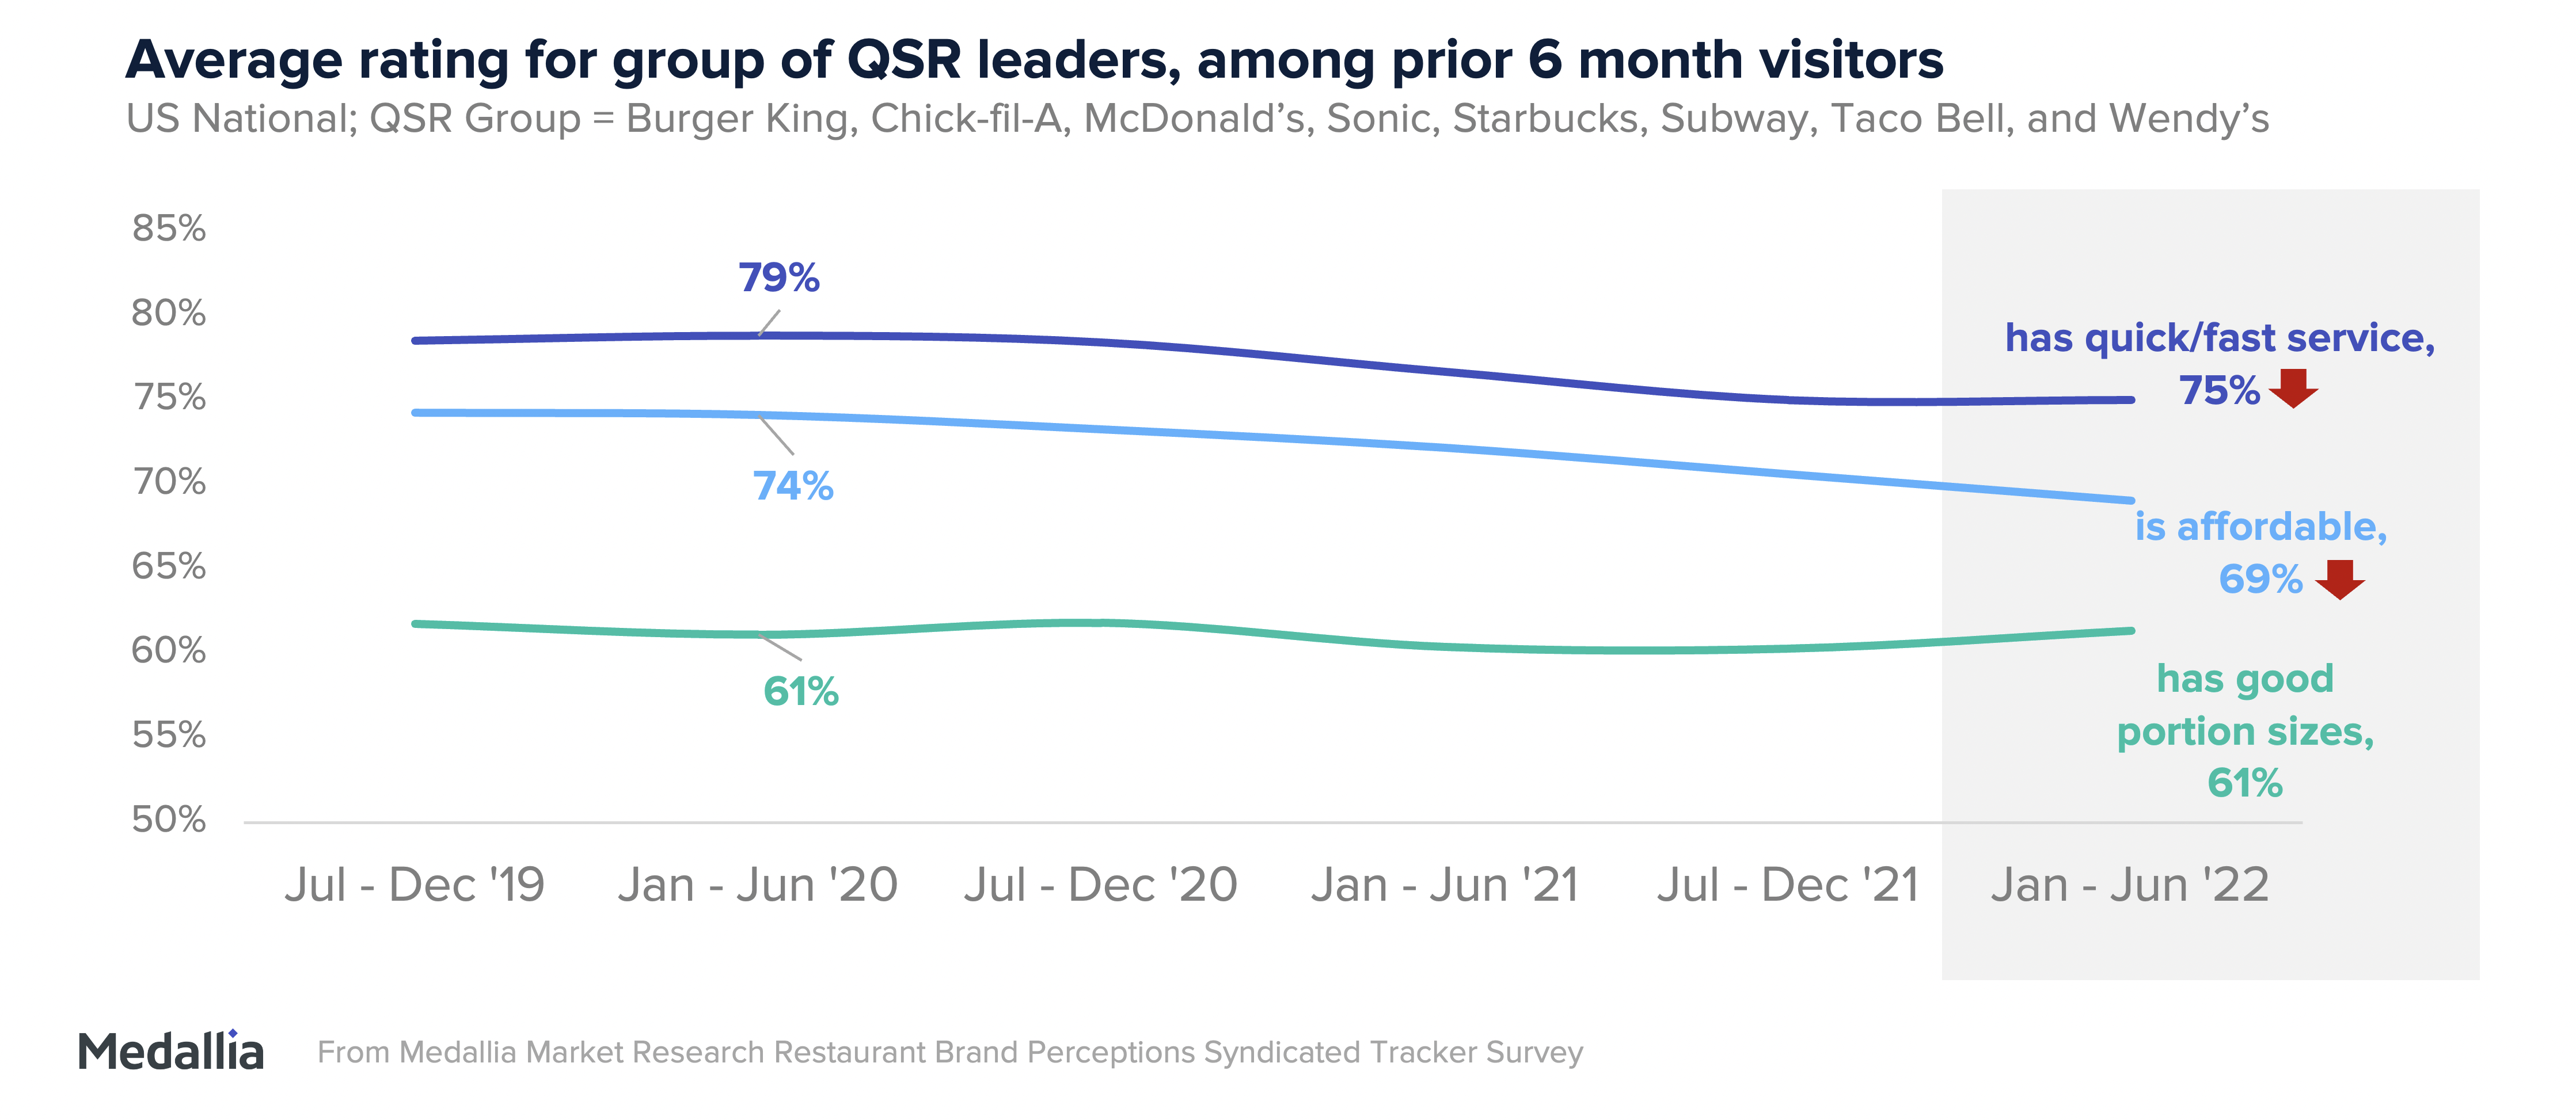 Average rating for group of QSR leaders among prior 6 months visitors. This is related to Burger King, Chick-fil-A, McDonald’s, Sonic, Starbucks, Subway, Taco Bell, and Wendy’s. It seems that the perception that they have quick service and good portion sizes has mostly head steady since 2019.